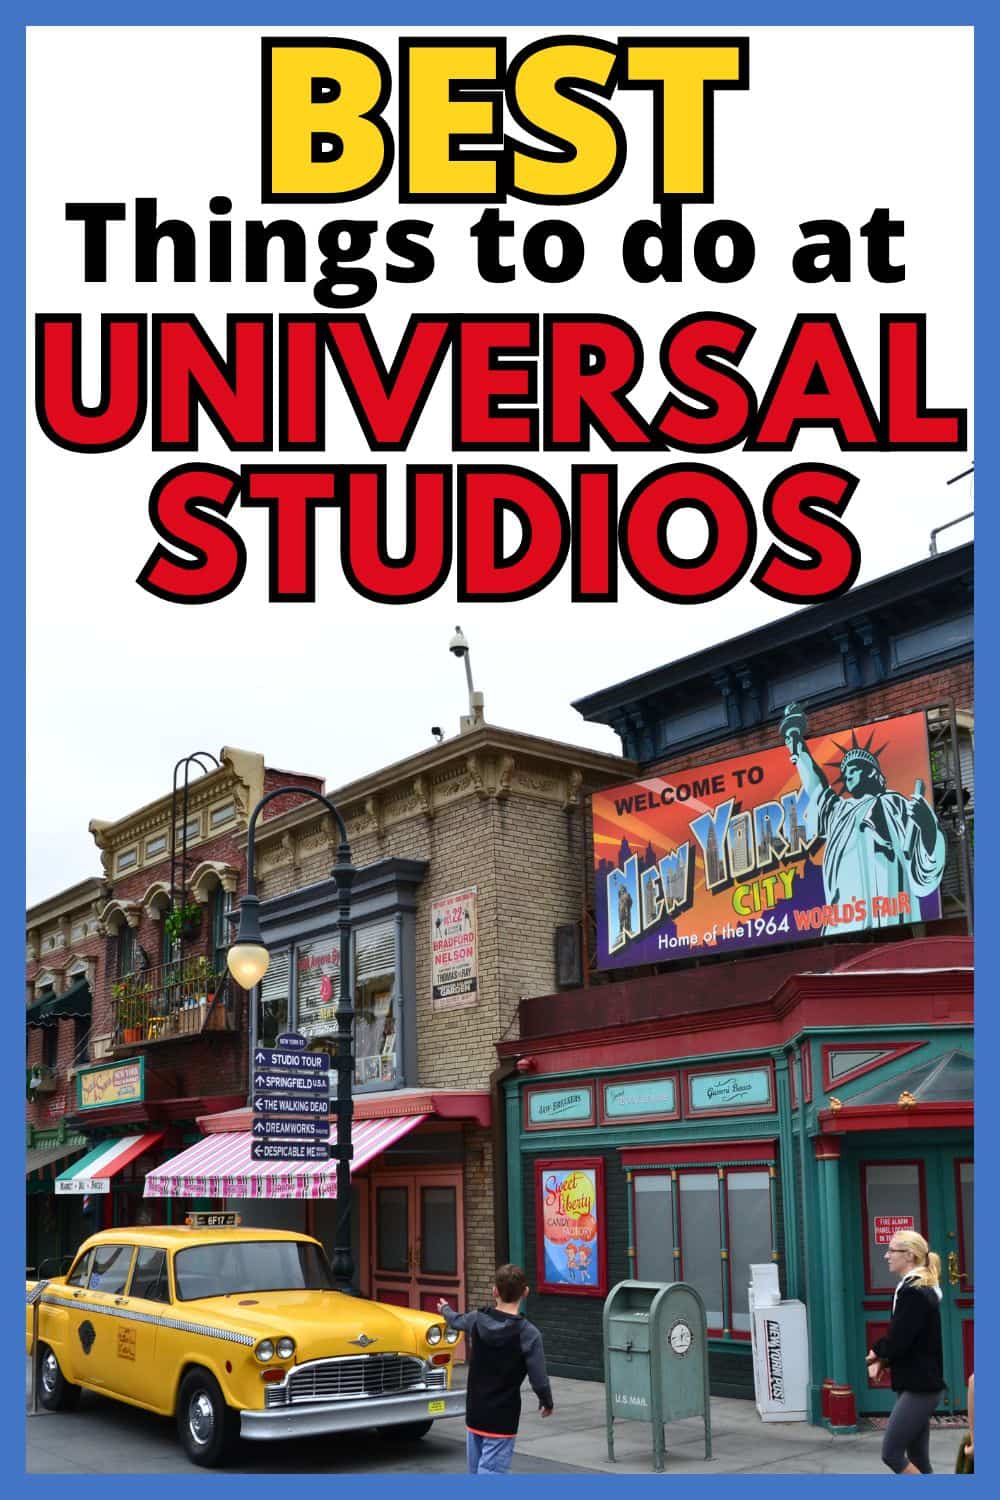 Best Things to do at Universal Studios Hollywood